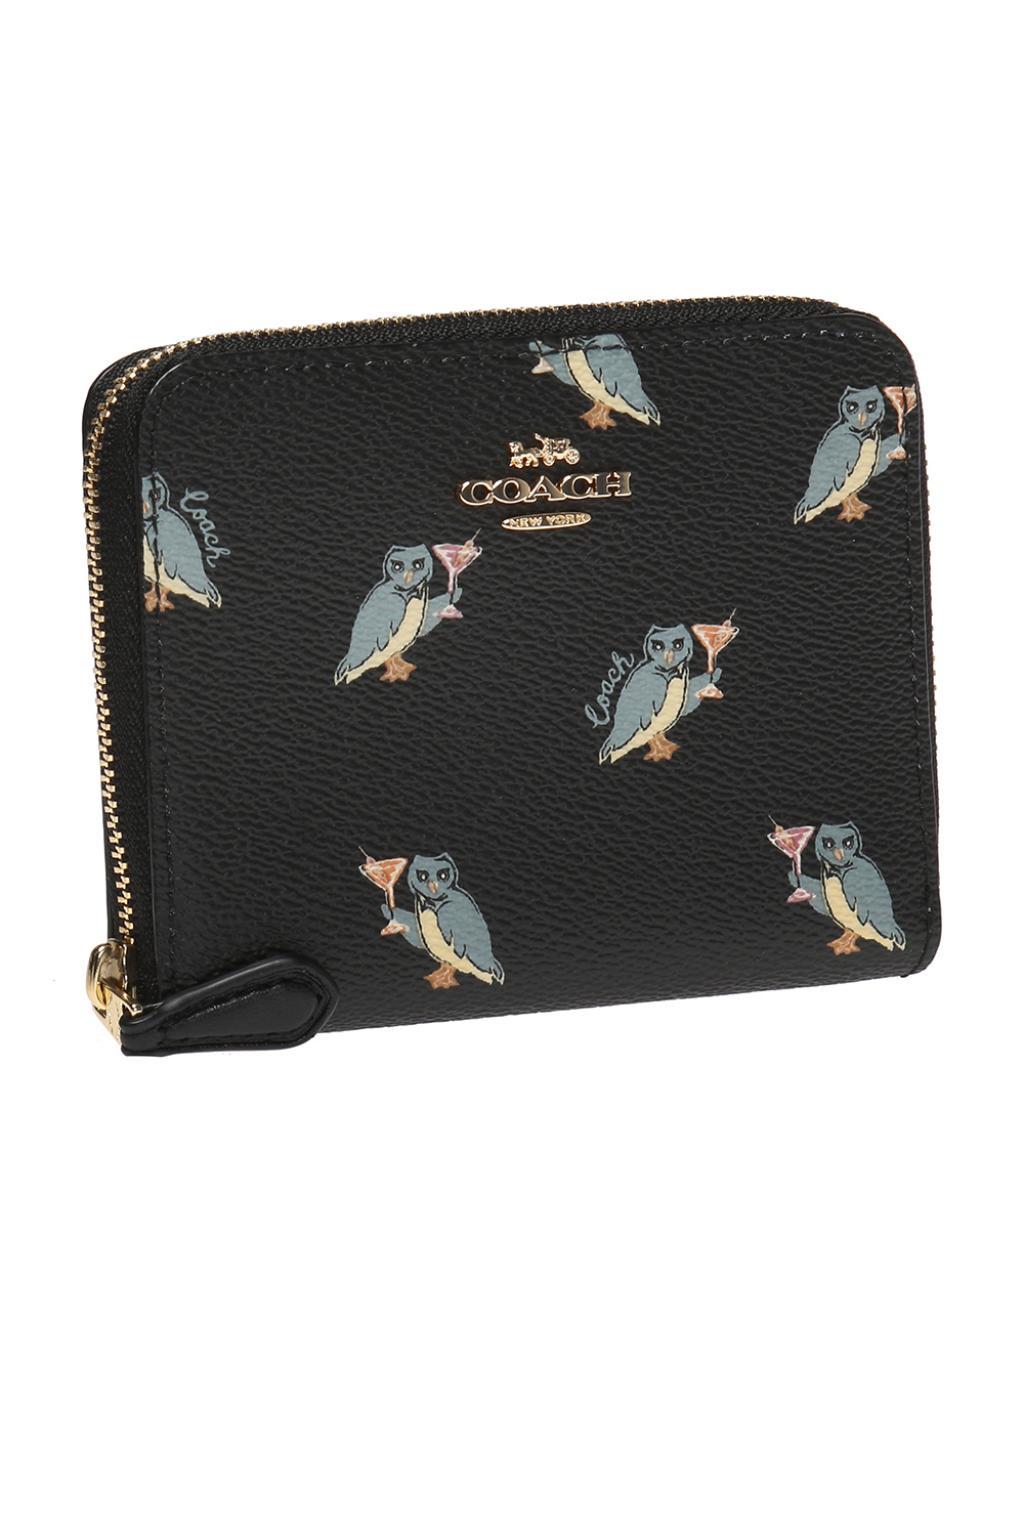 COACH Canvas 1941 Small Zip Around Wallet With Party Owl Print in Black - Lyst